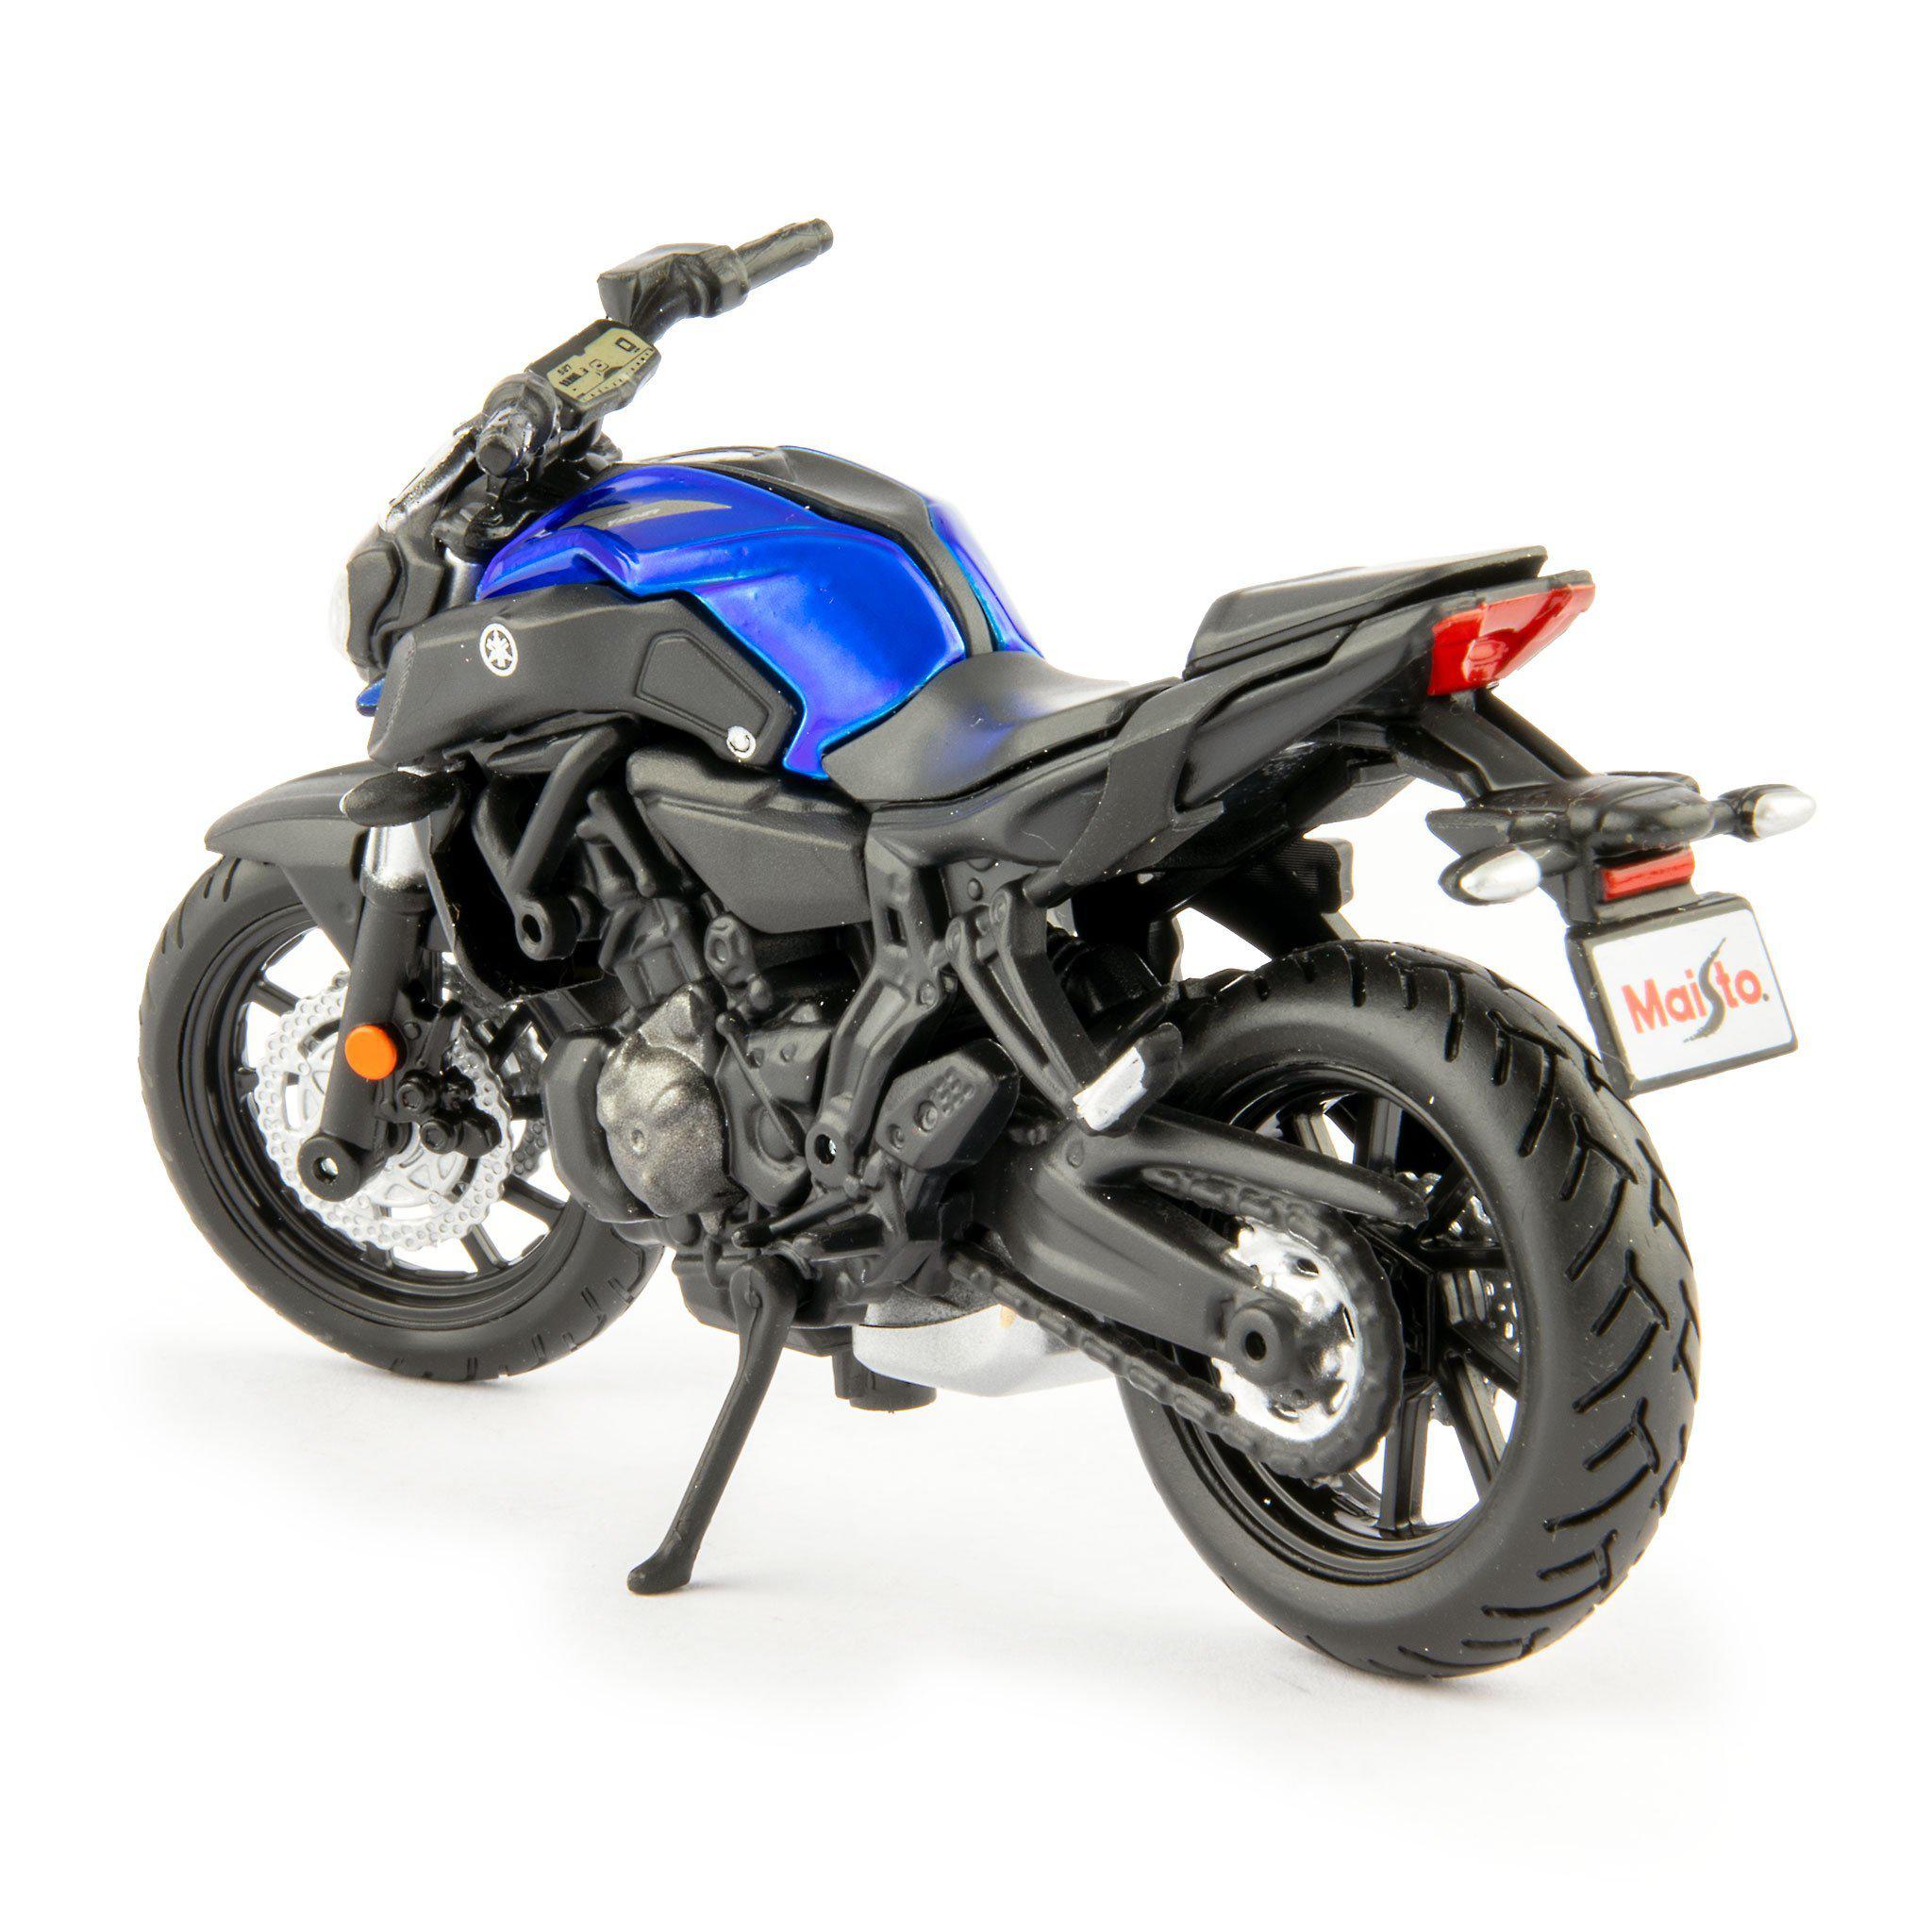 Motorcycle Miniature Repro Model Yamaha MT-07 Scale 1:18 Die Cast Layout